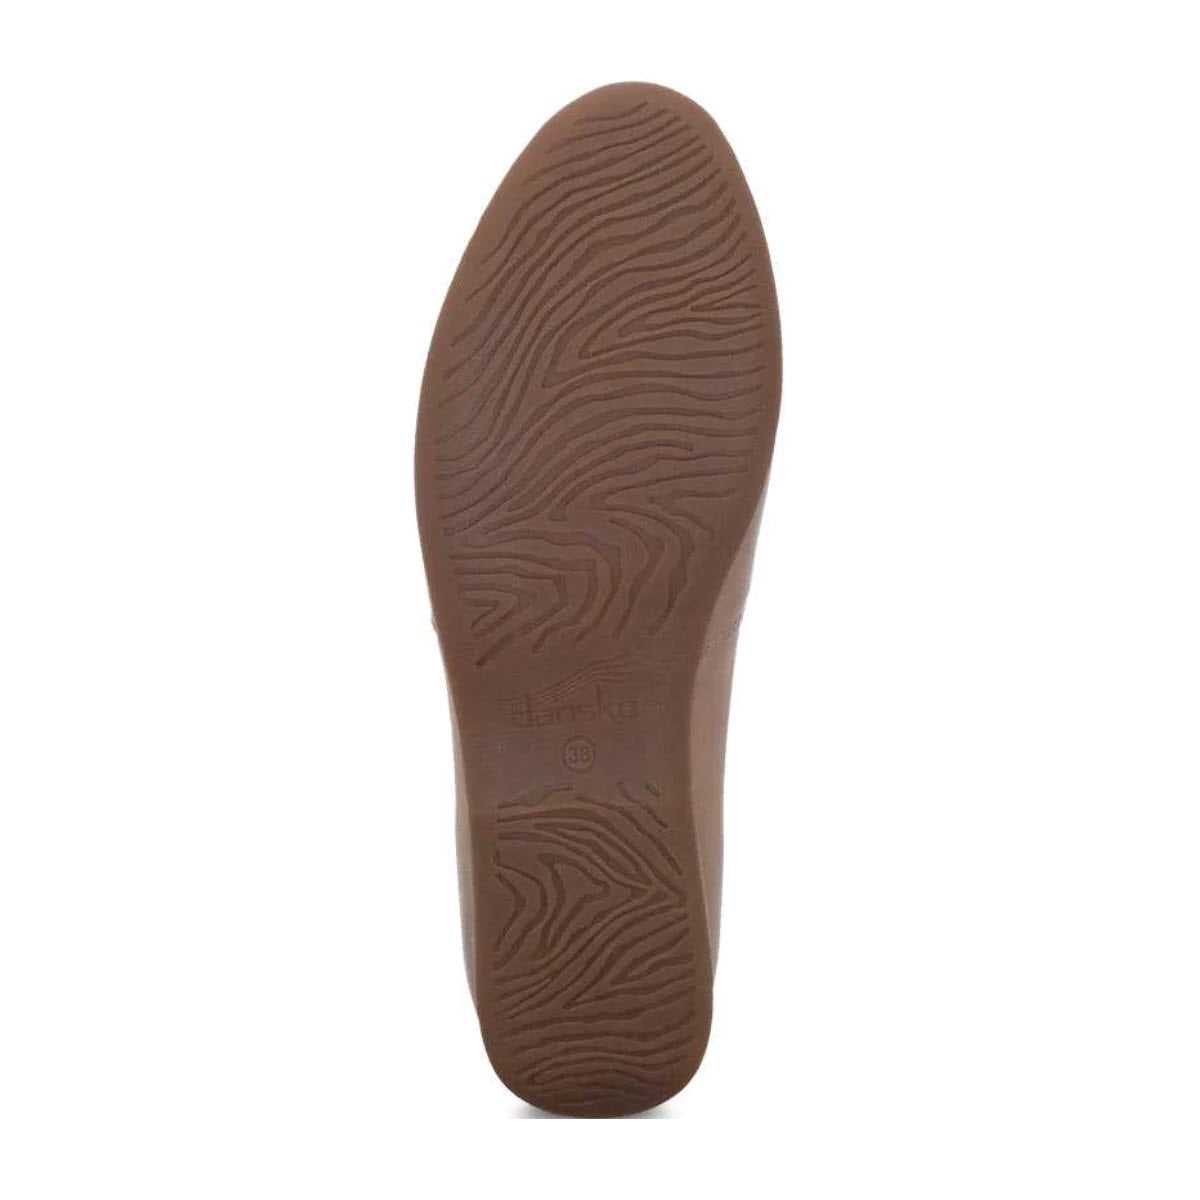 Brown Dansko Larisa Taupe slip-on flat sole with textured pattern and brand logo.